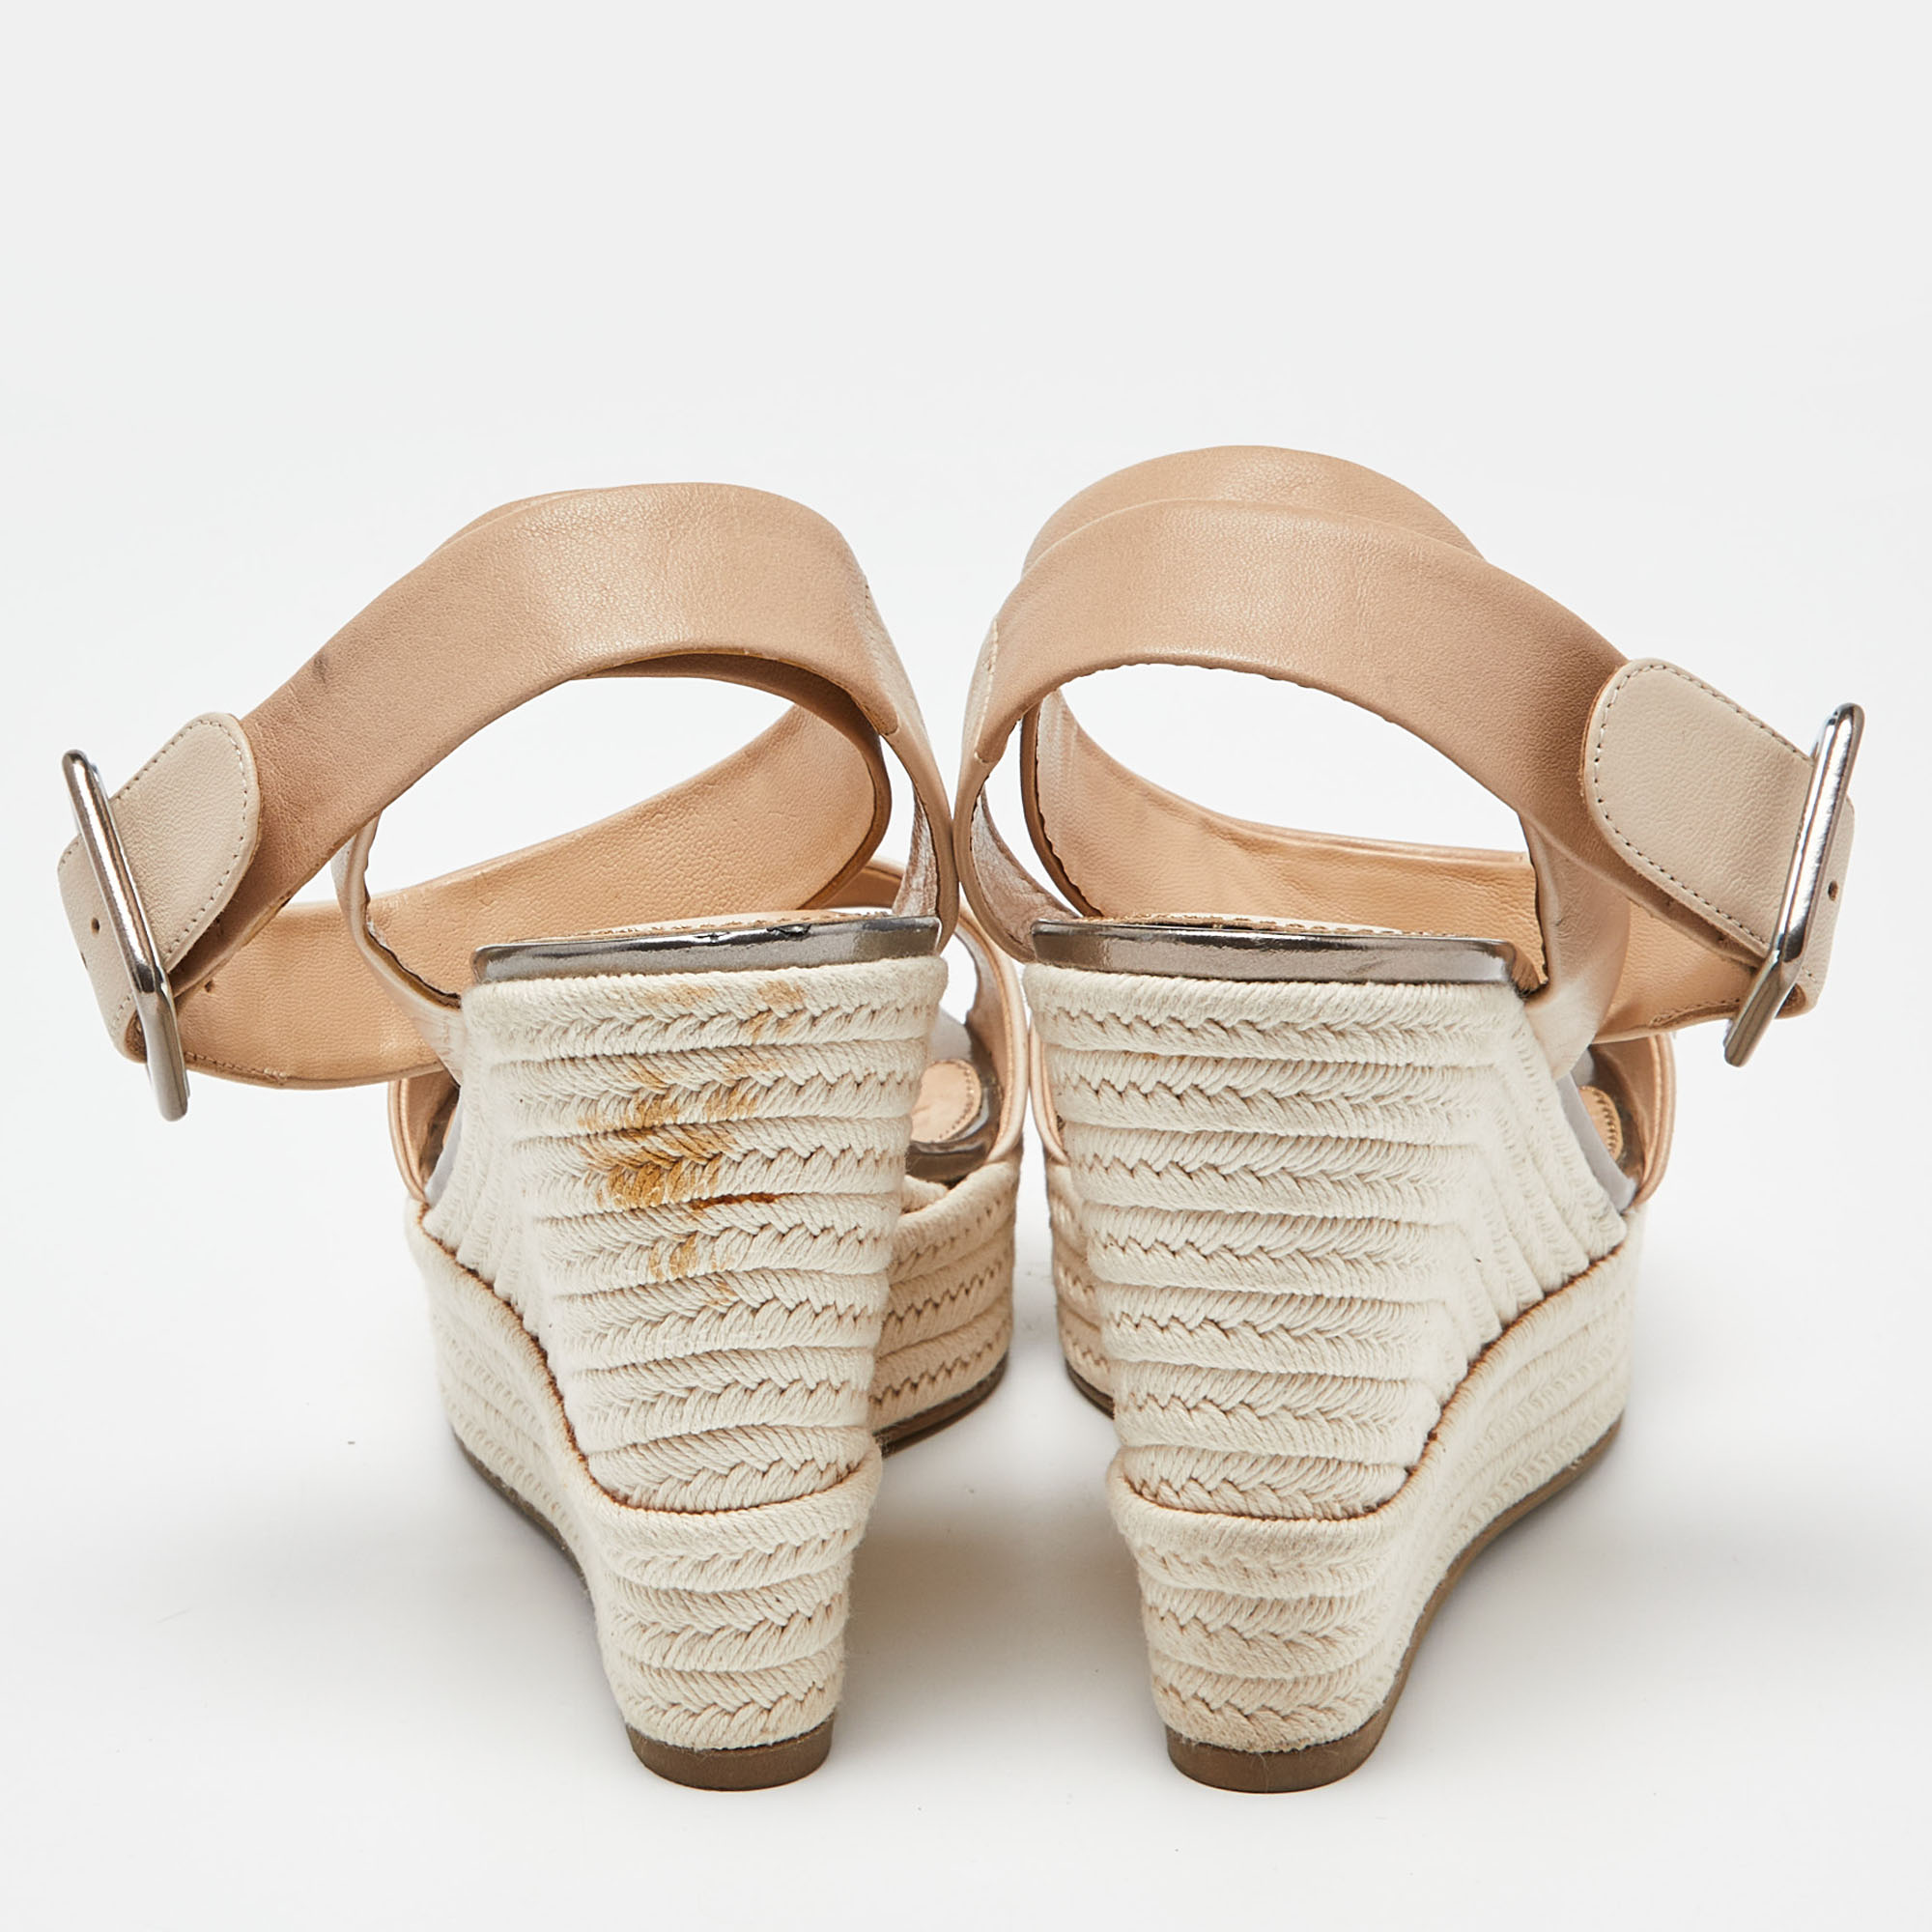 Sergio Rossi Beige Leather Espadrille Wedge Ankle Strap Sandals 39